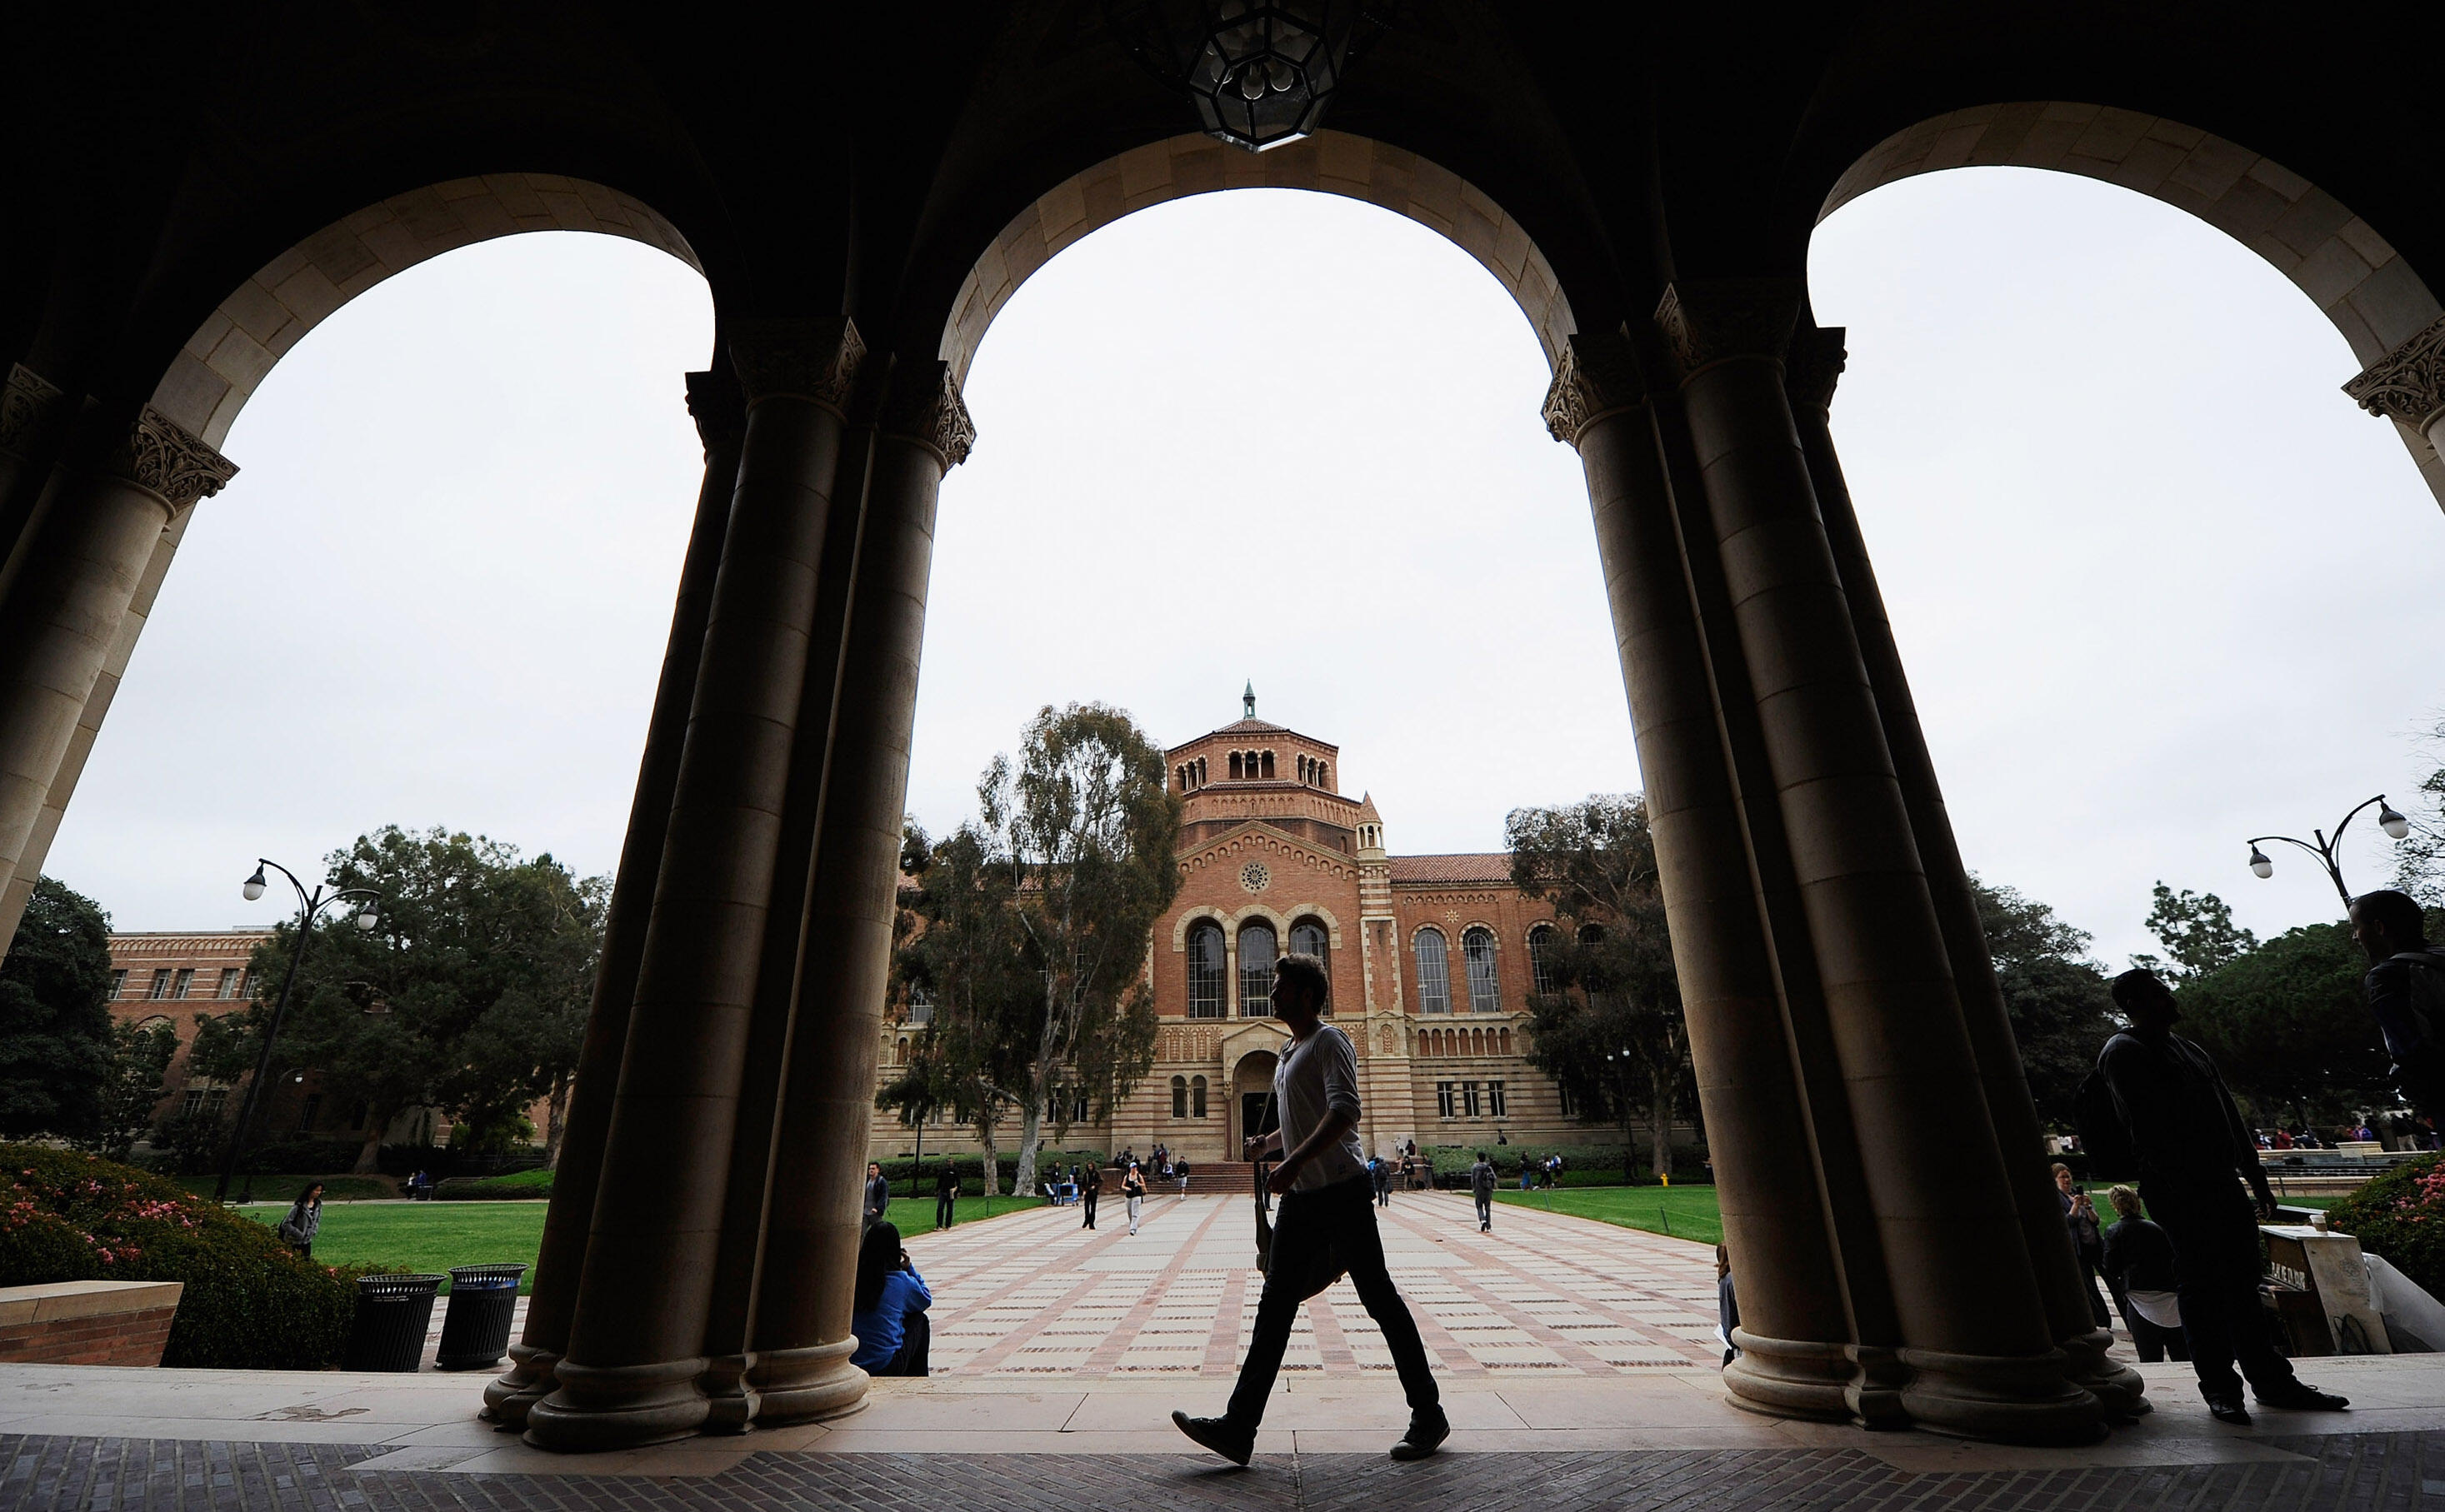 LOS ANGELES, CA - APRIL 23:  A student walks near Royce Hall on the campus of UCLA on April 23, 2012 in Los Angeles, California. According to reports, half of recent college graduates with bachelor's degrees are finding themselves underemployed or jobless